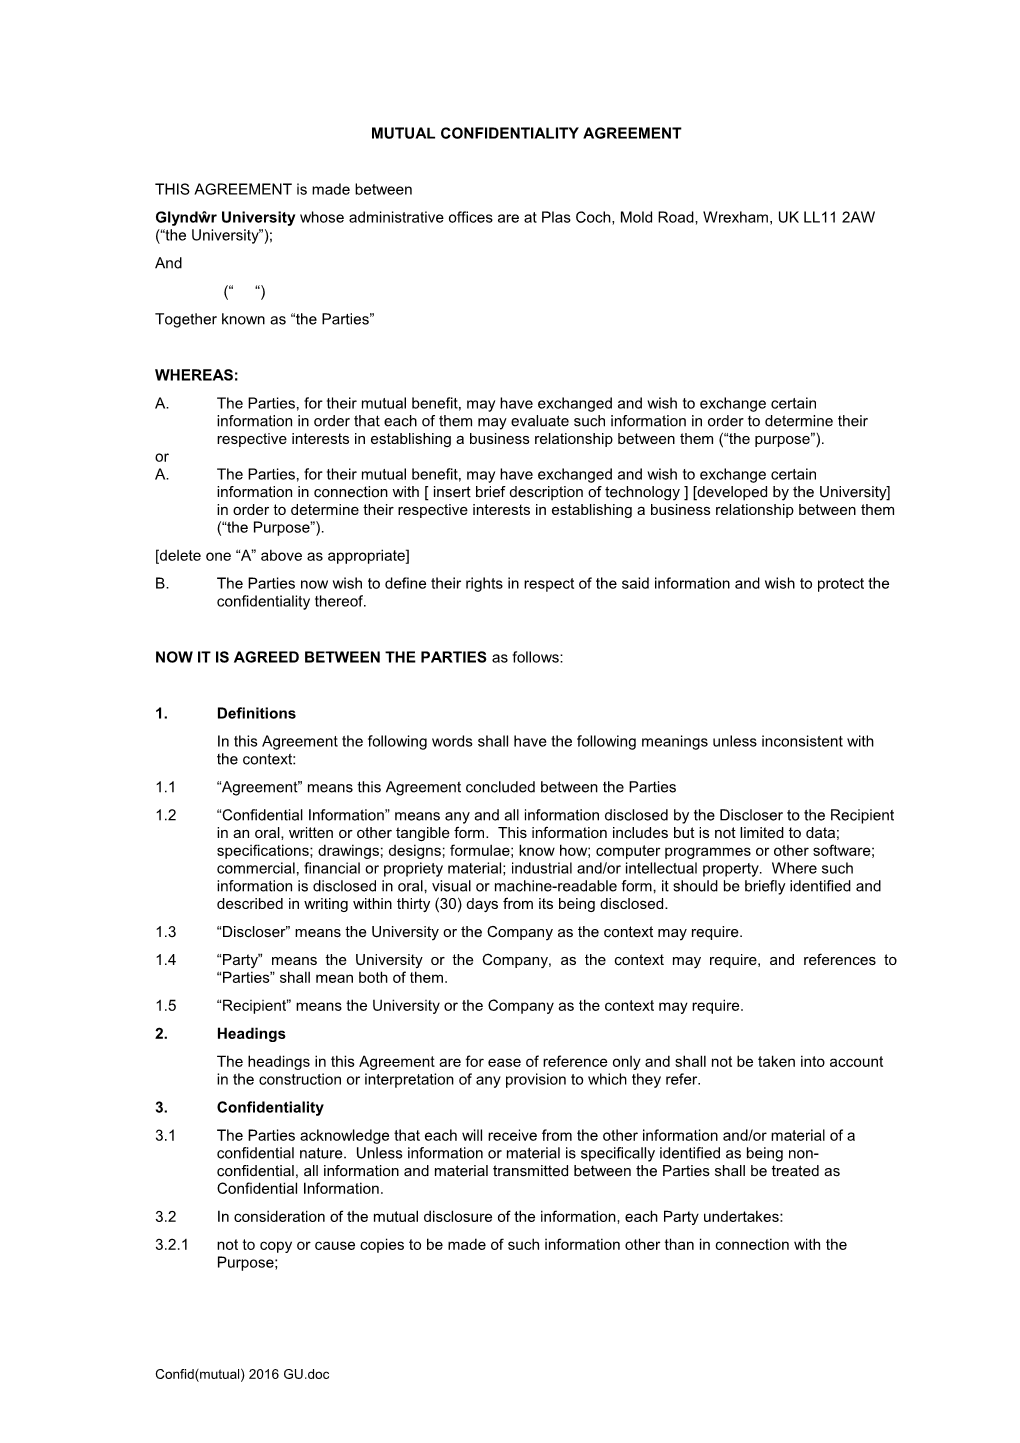 Unilateral (University Disclosing) Confidentiality Agreement